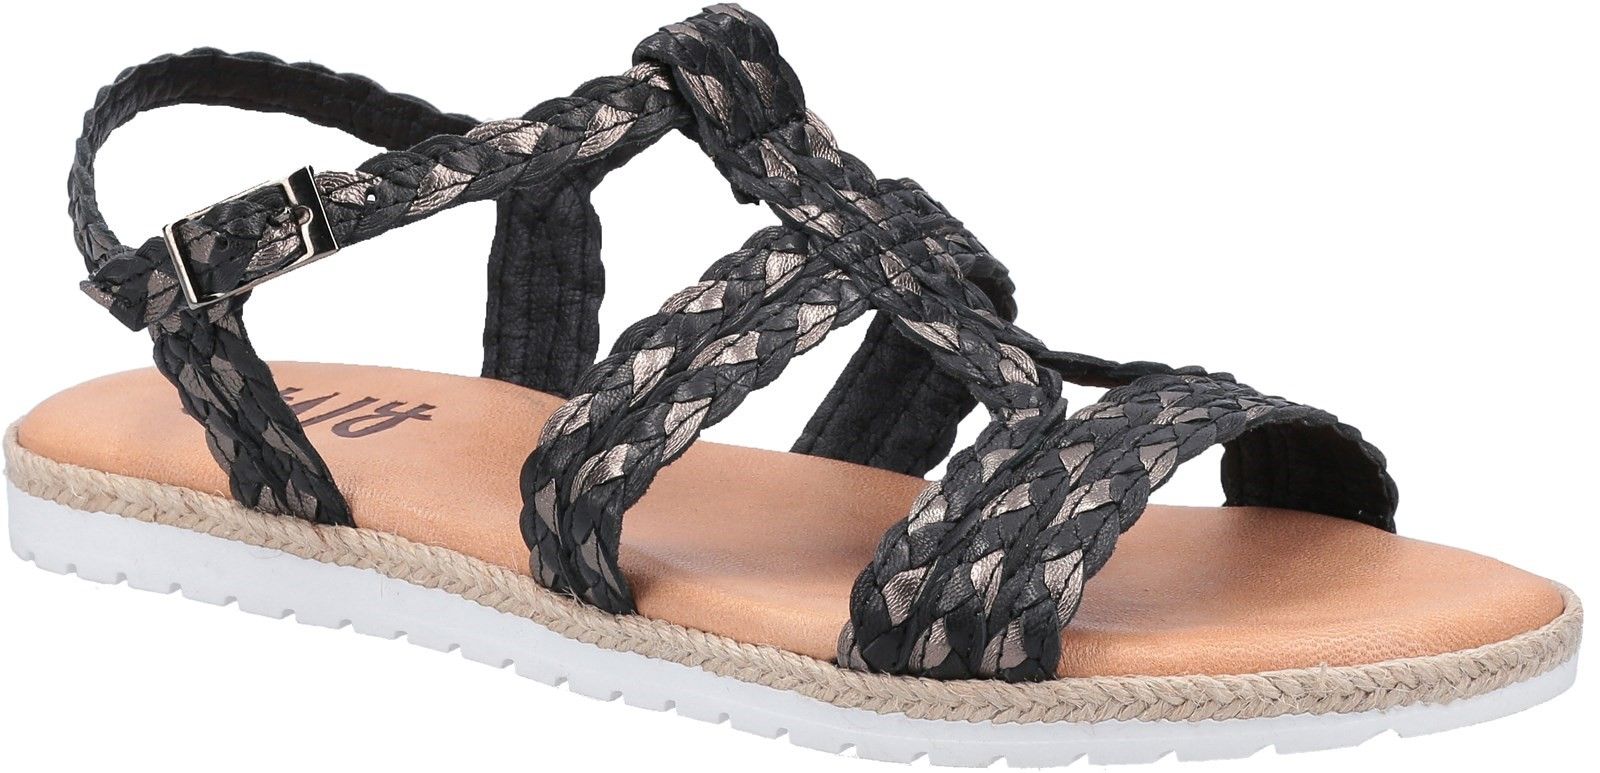 Riva Port De Molins is a womens strappy flat summer sandal with eye-catching multicoloured plait detail leather uppers and leather lining.